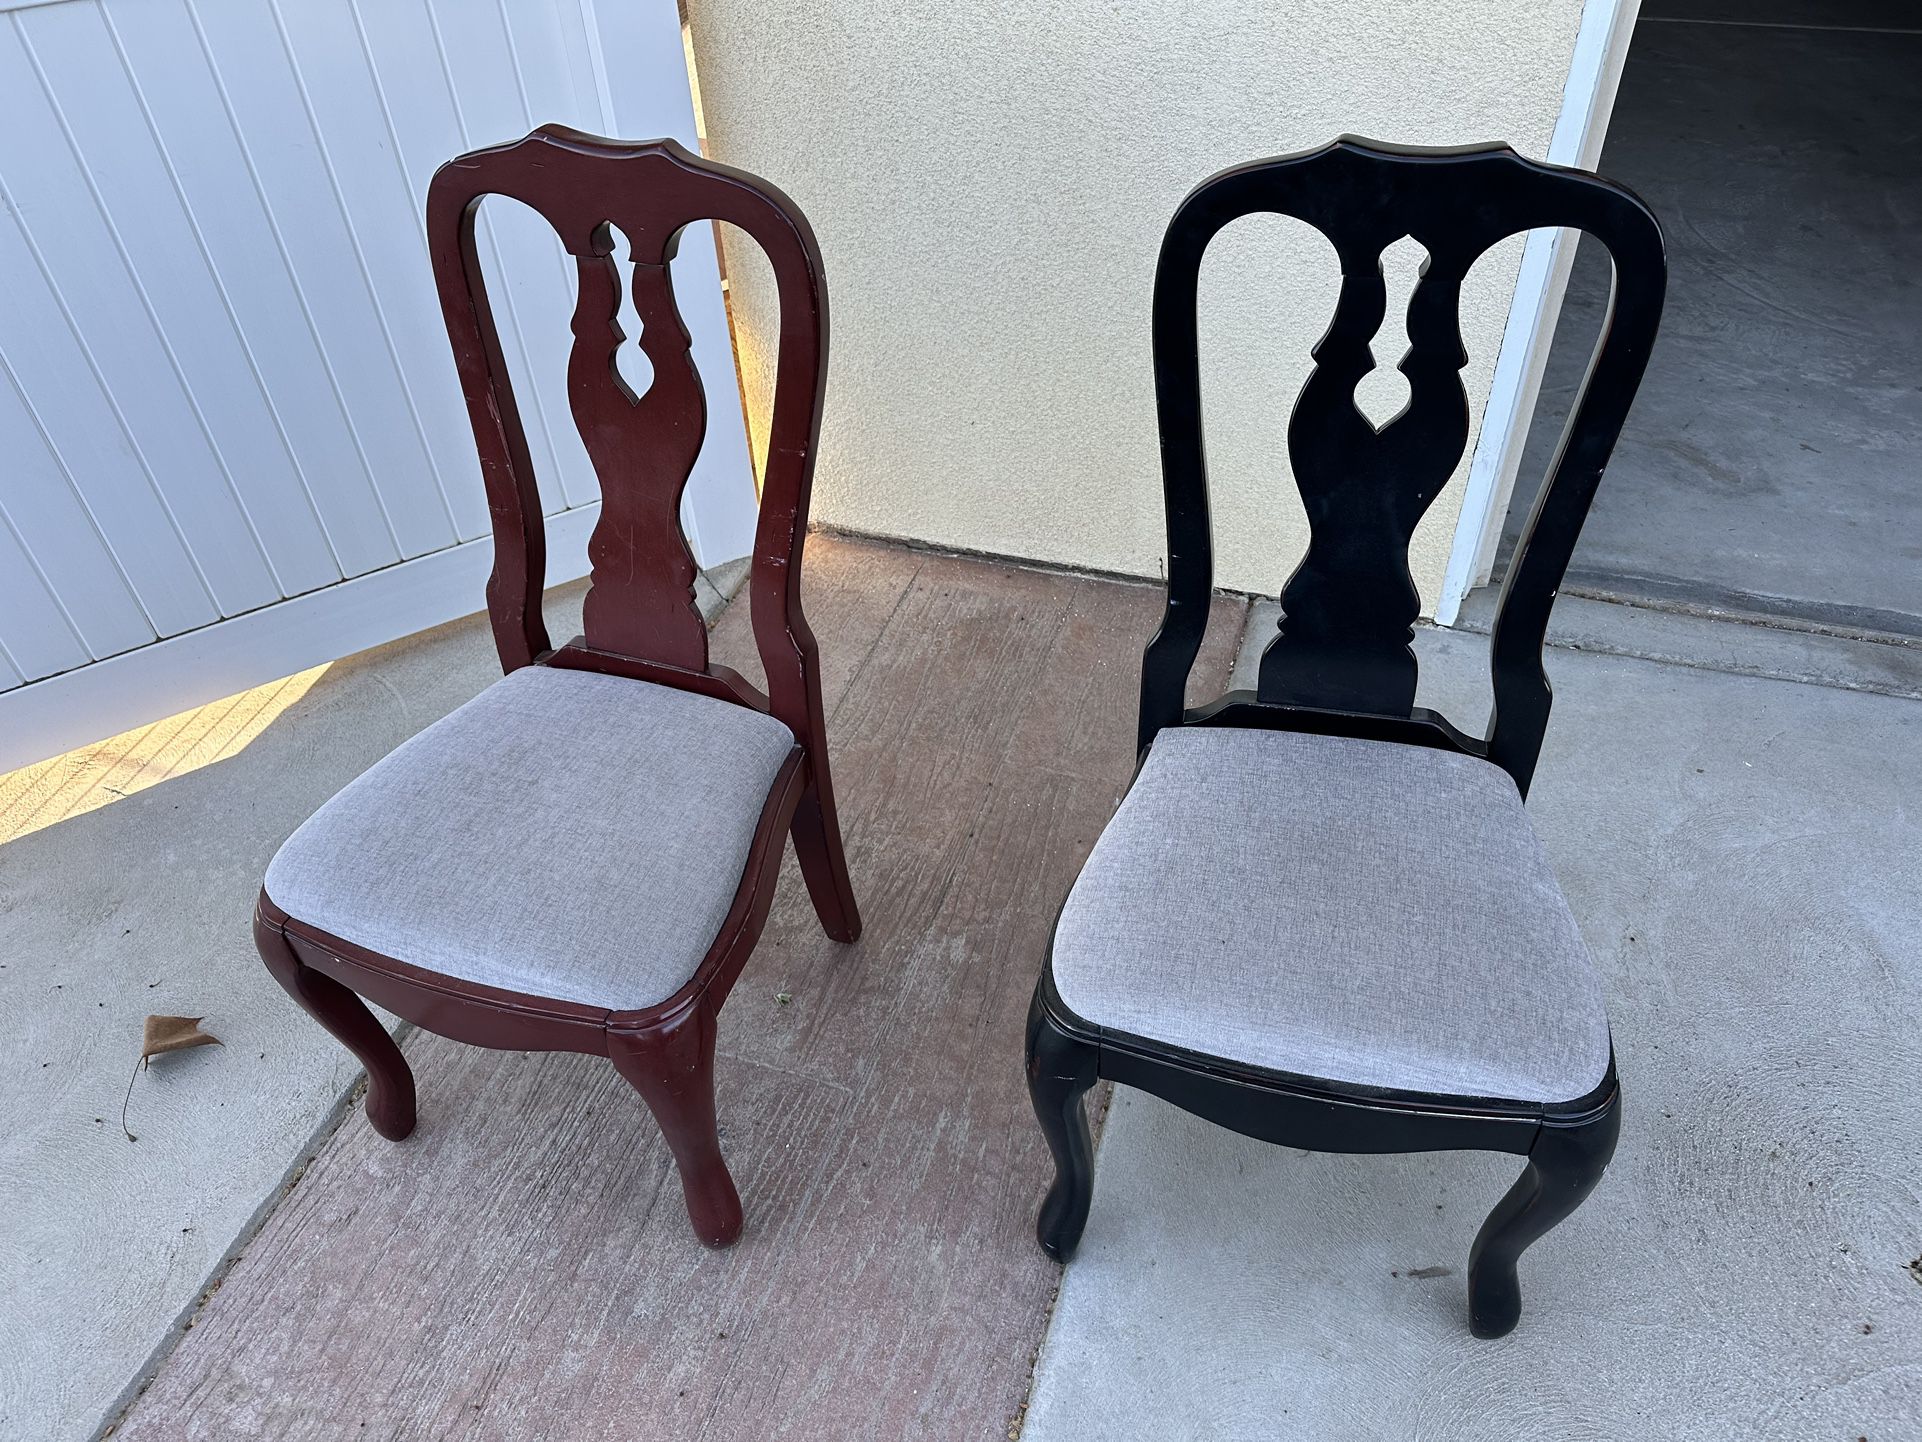 Pottery Barn Kitchen Table Chairs